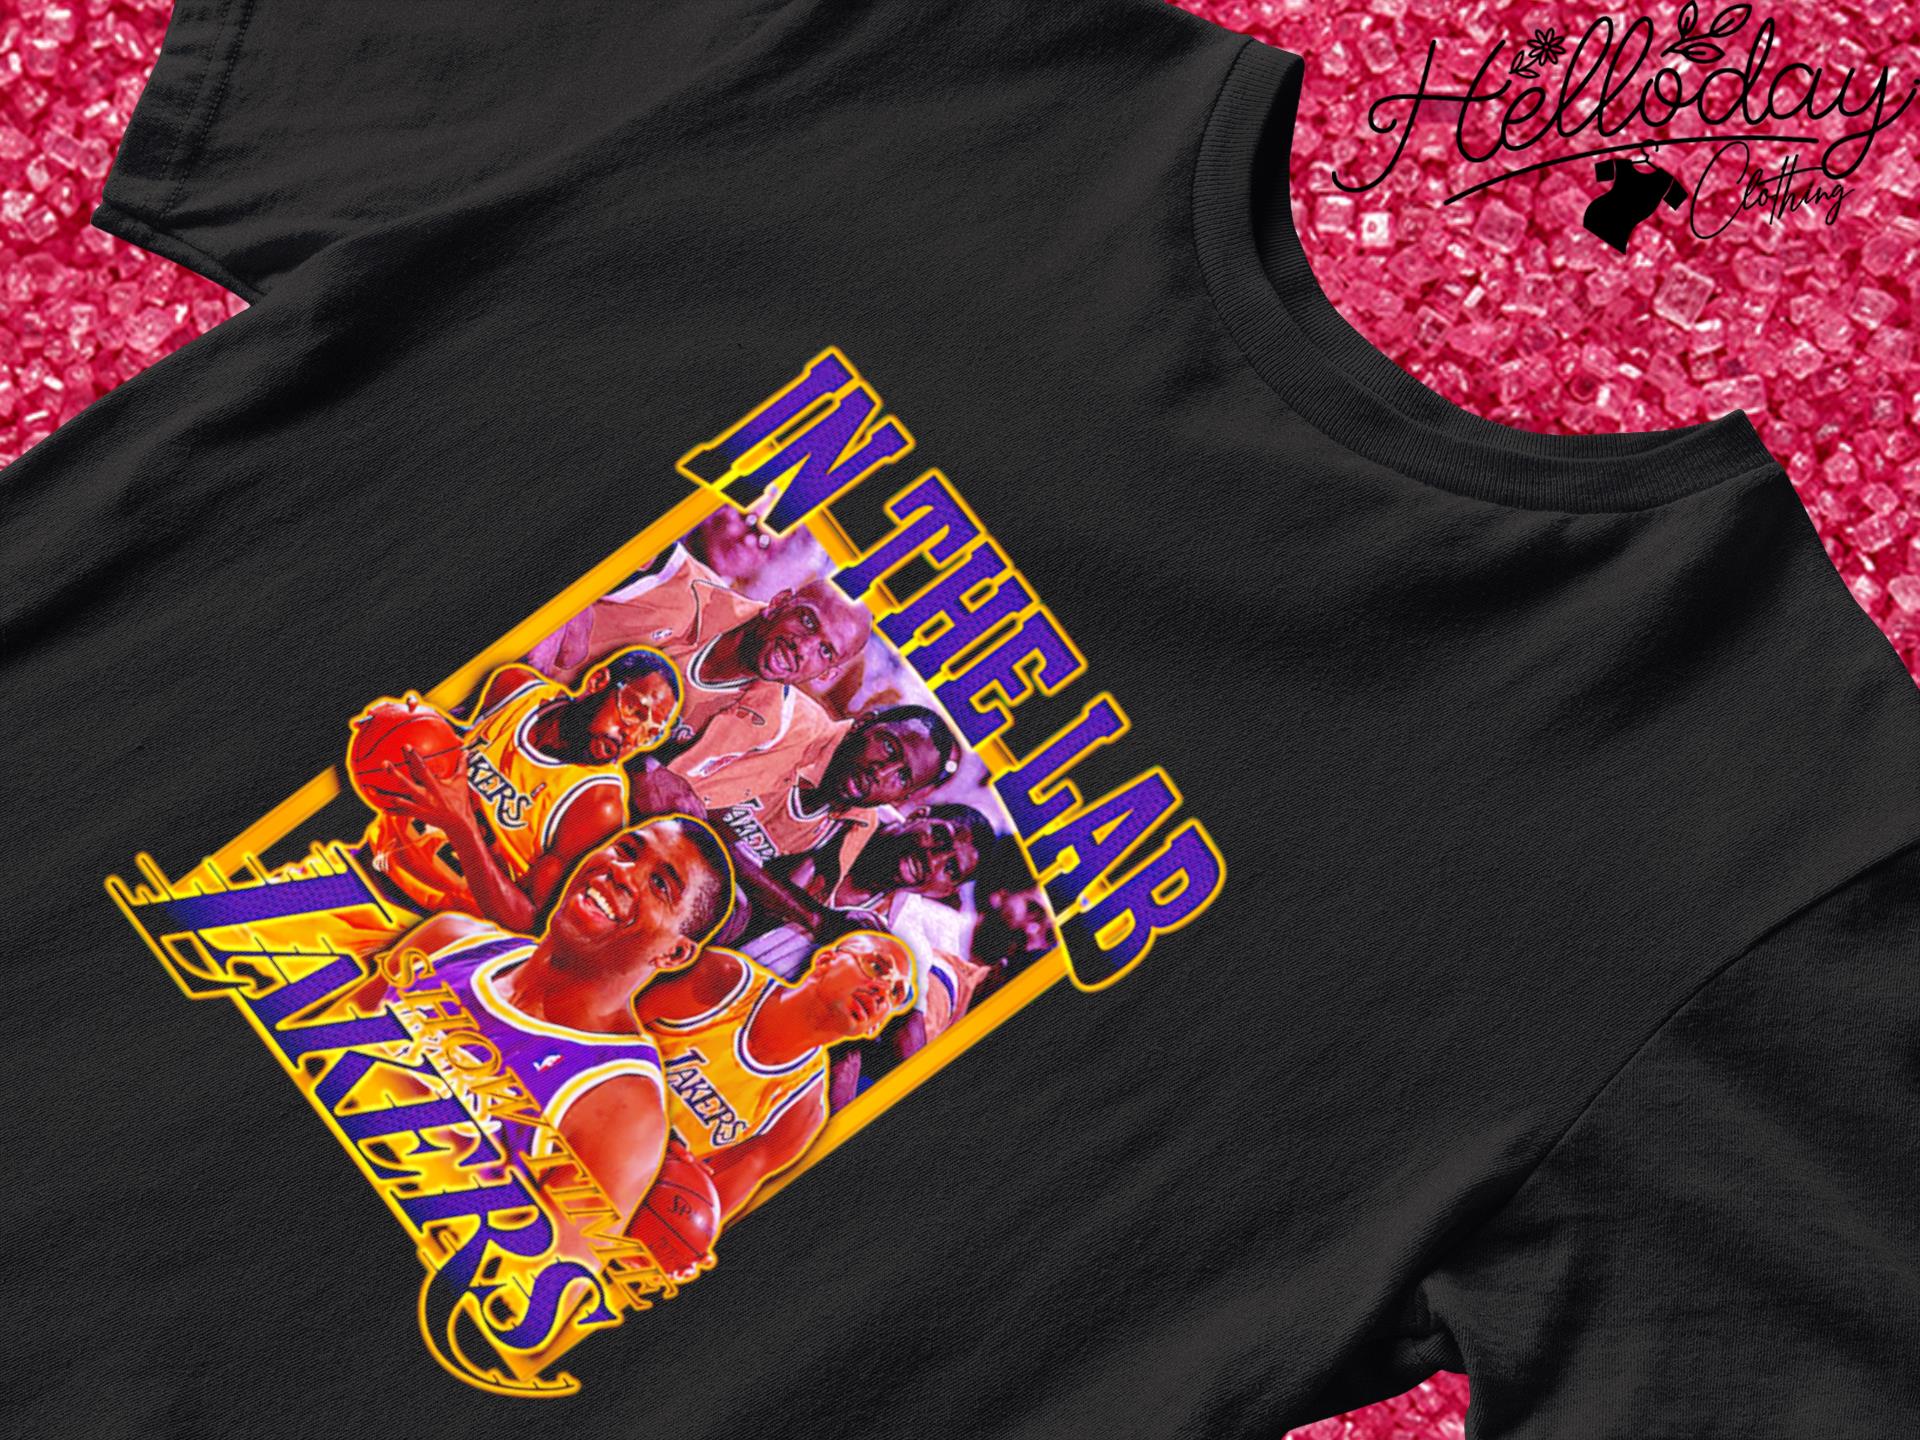 Showtime Lakers in the Lab shirt